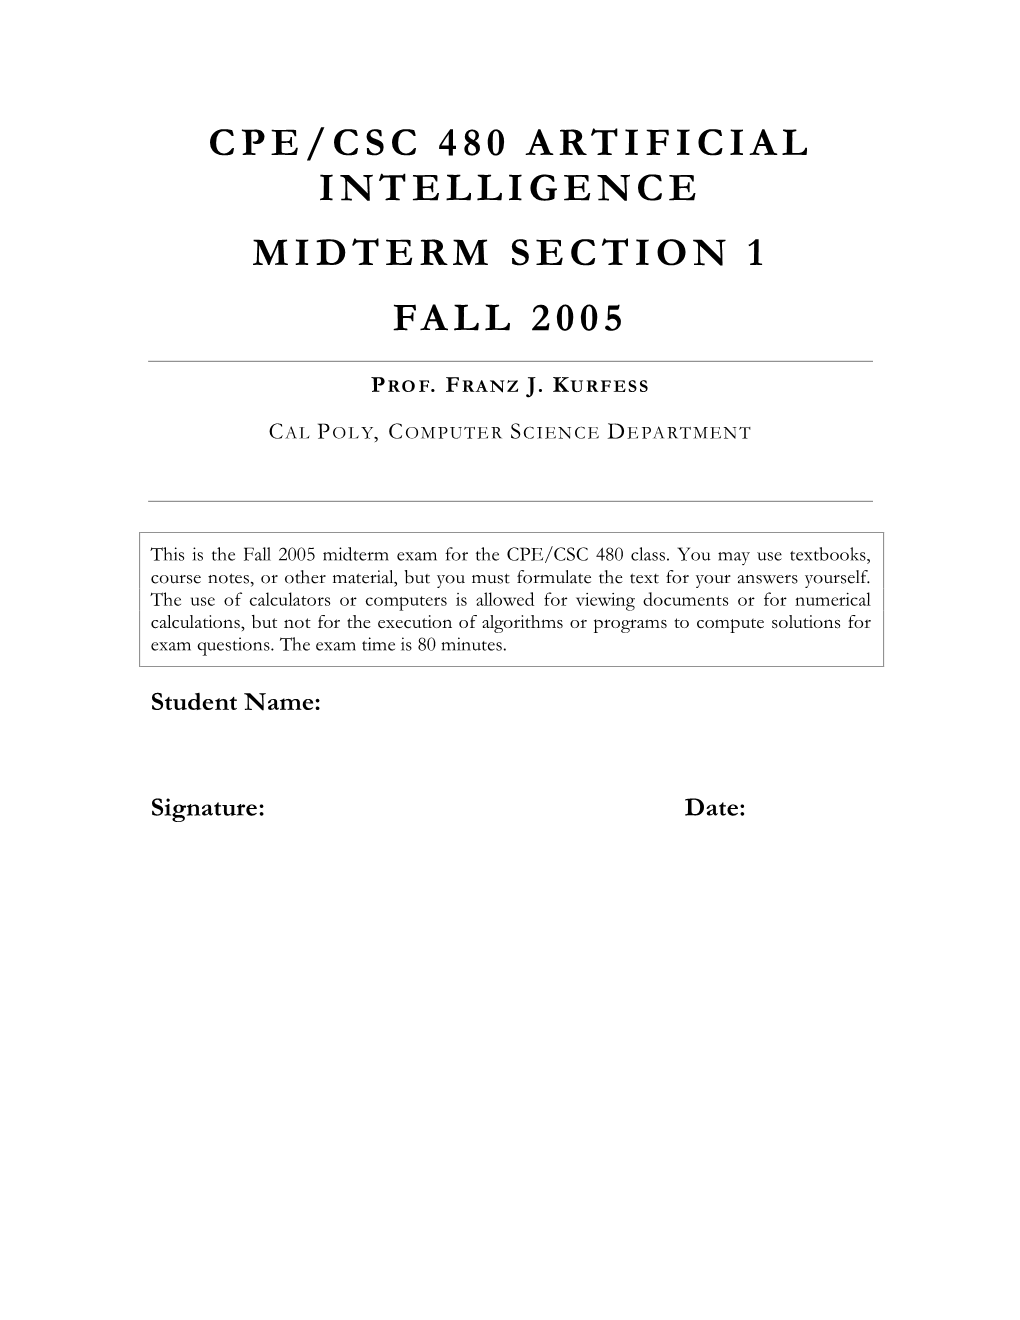 Cpe/Csc 480 Artificial Intelligence Midterm Section 1 Fall 2005